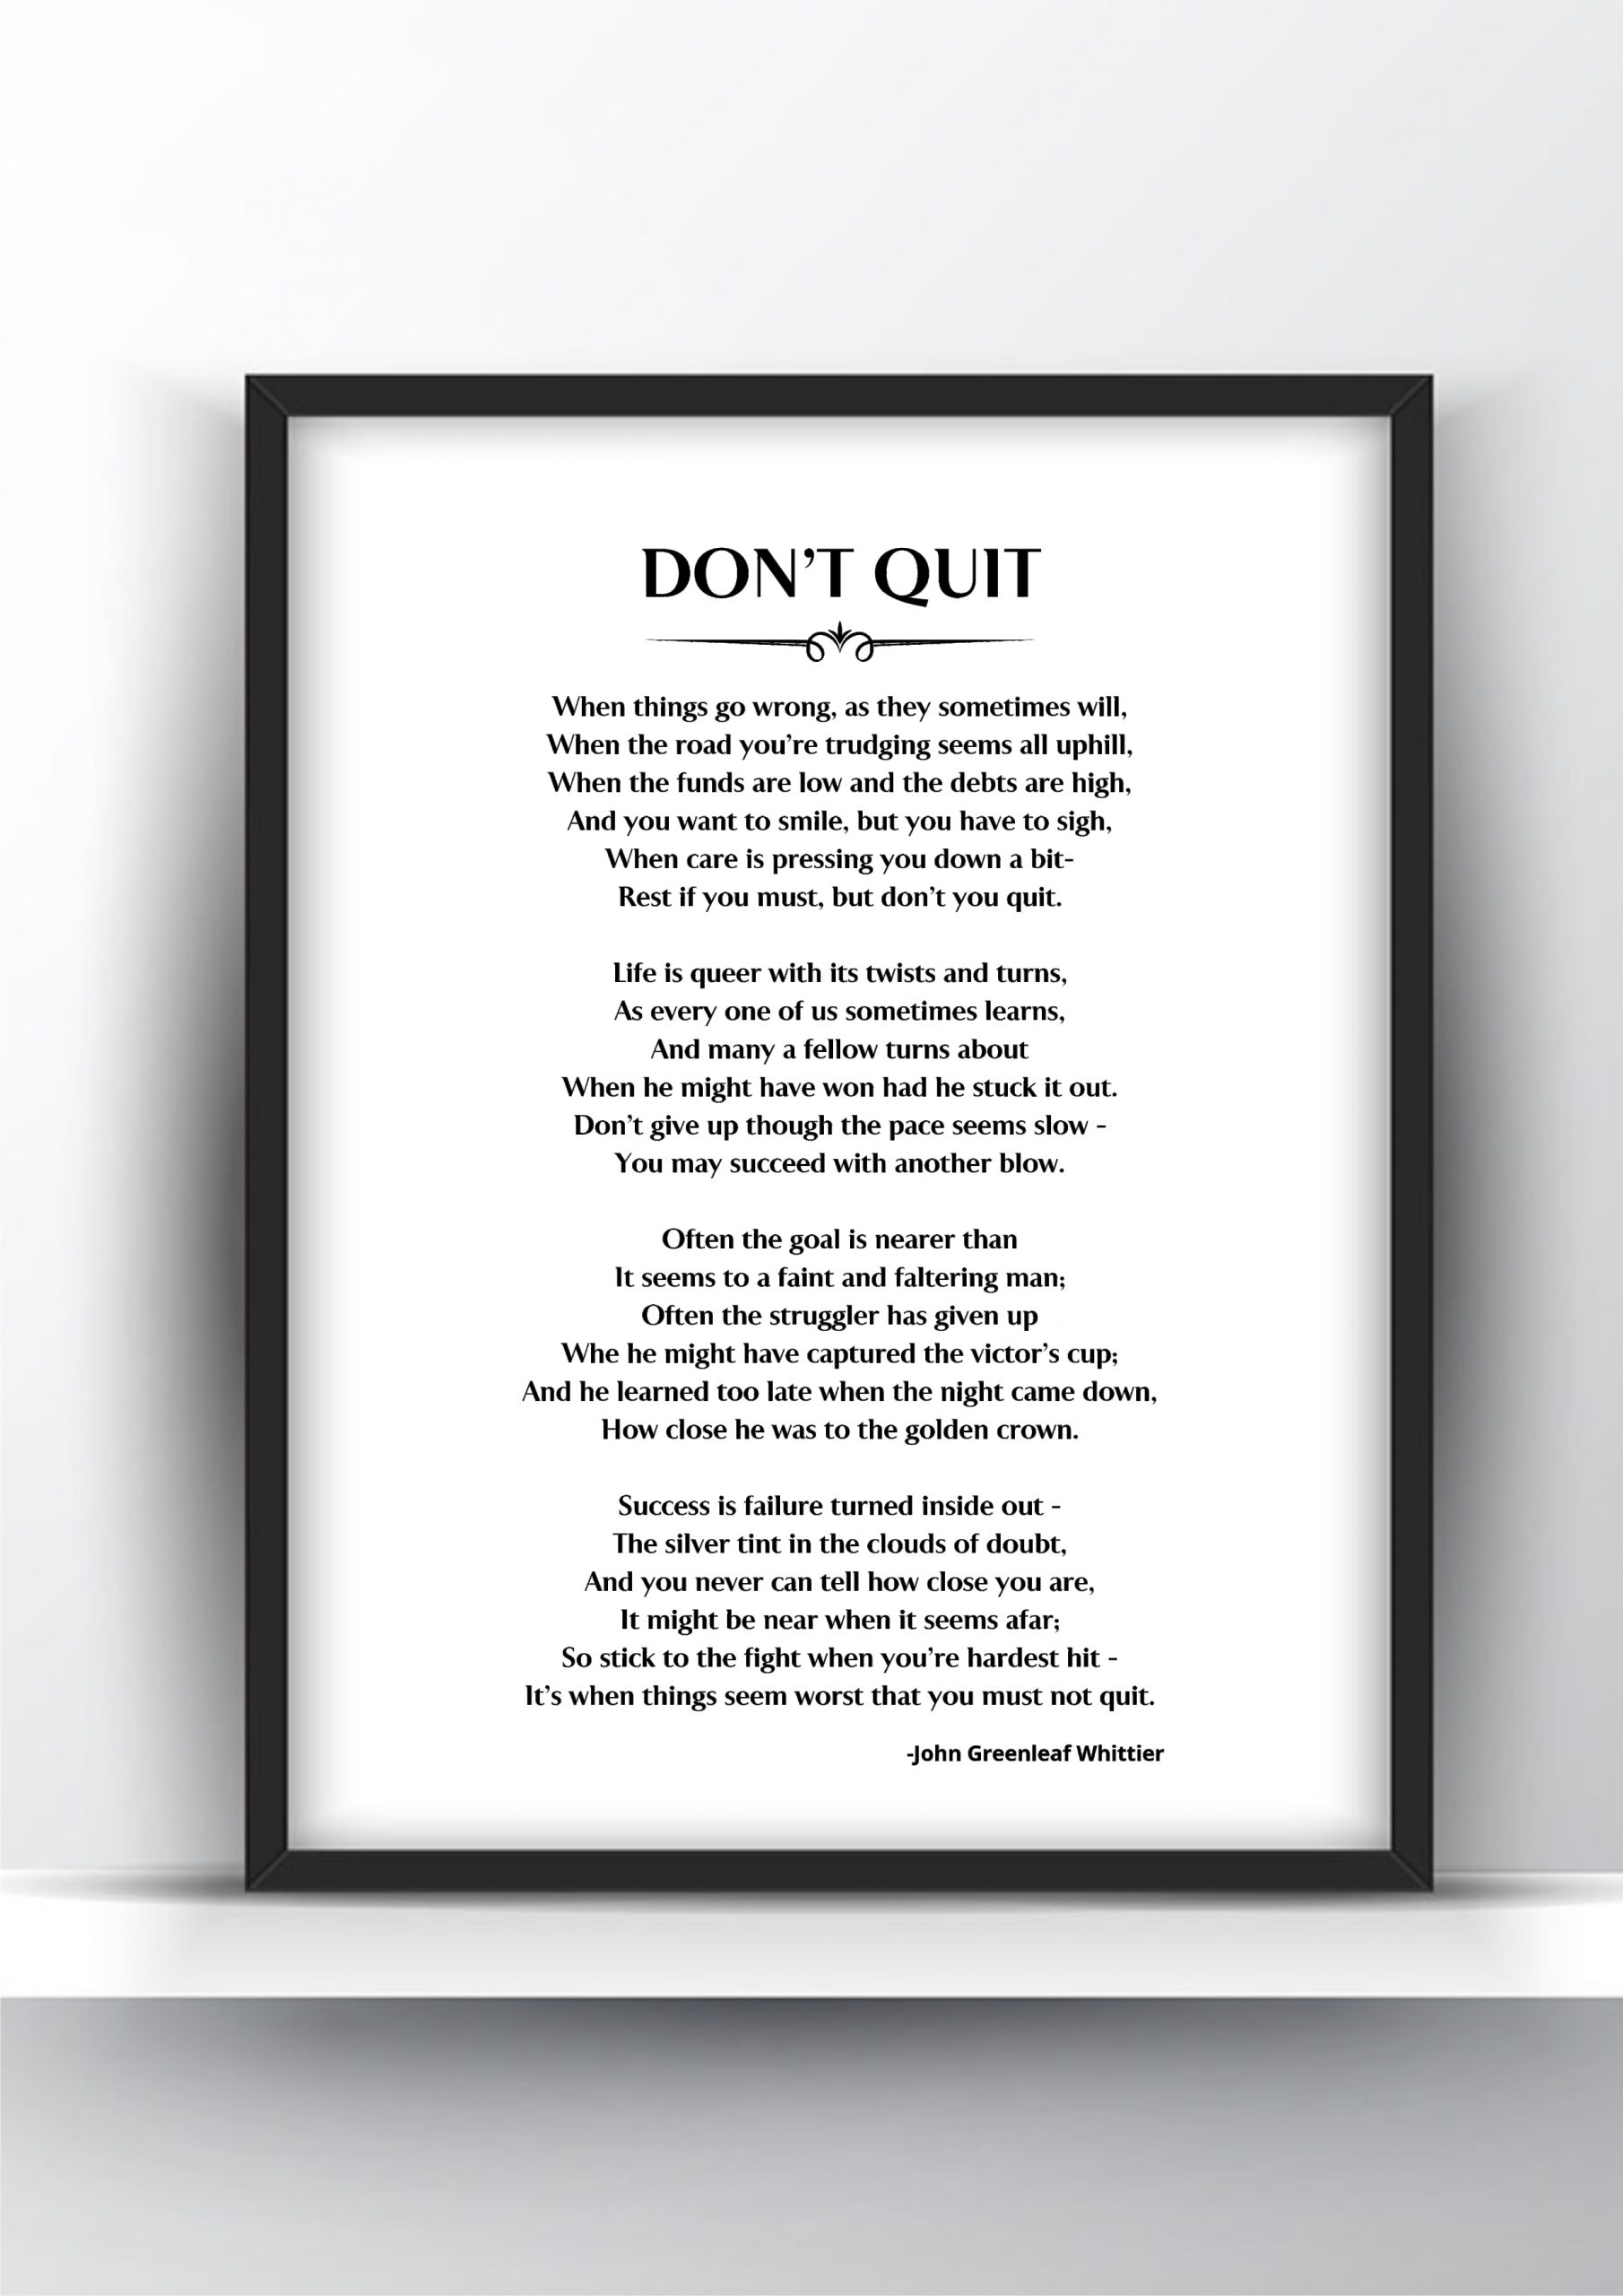 Don't Quit Poem by John Greenleaf Whittier Printable and Poster Shark